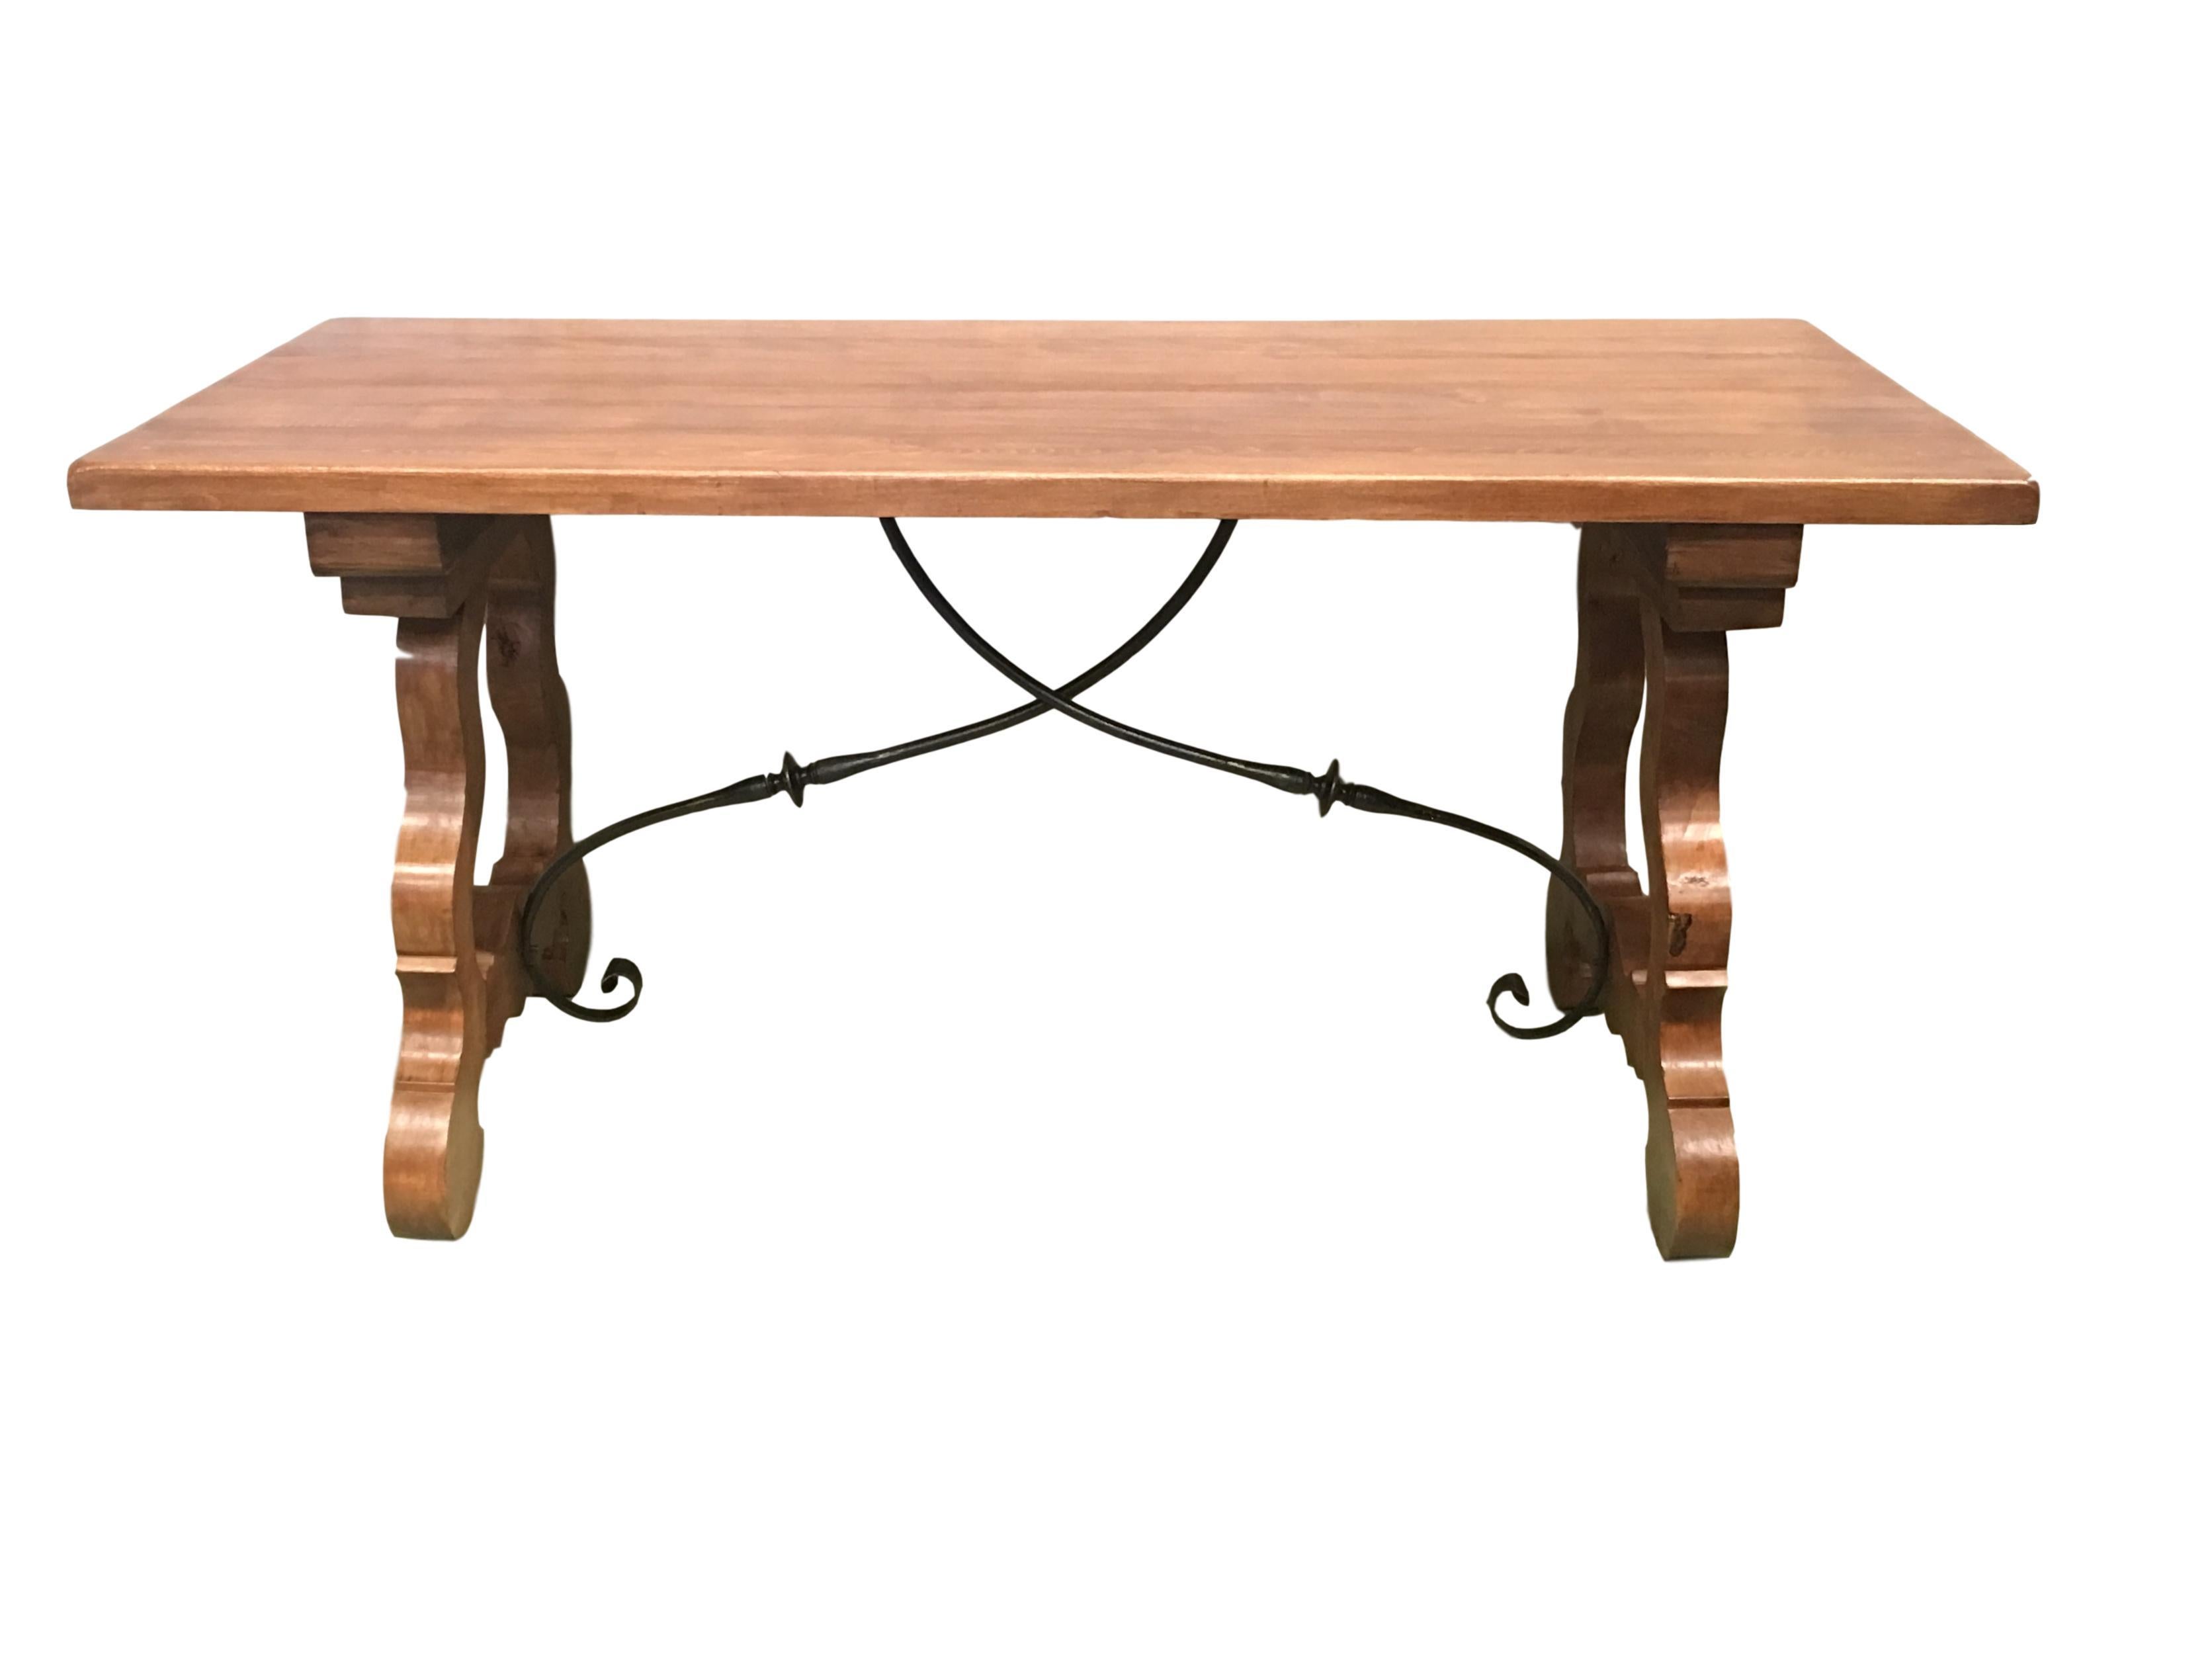 Spanish Colonial Early 20th Century Spanish Walnut Trestle Table and Forged Iron Stretcher, Desk